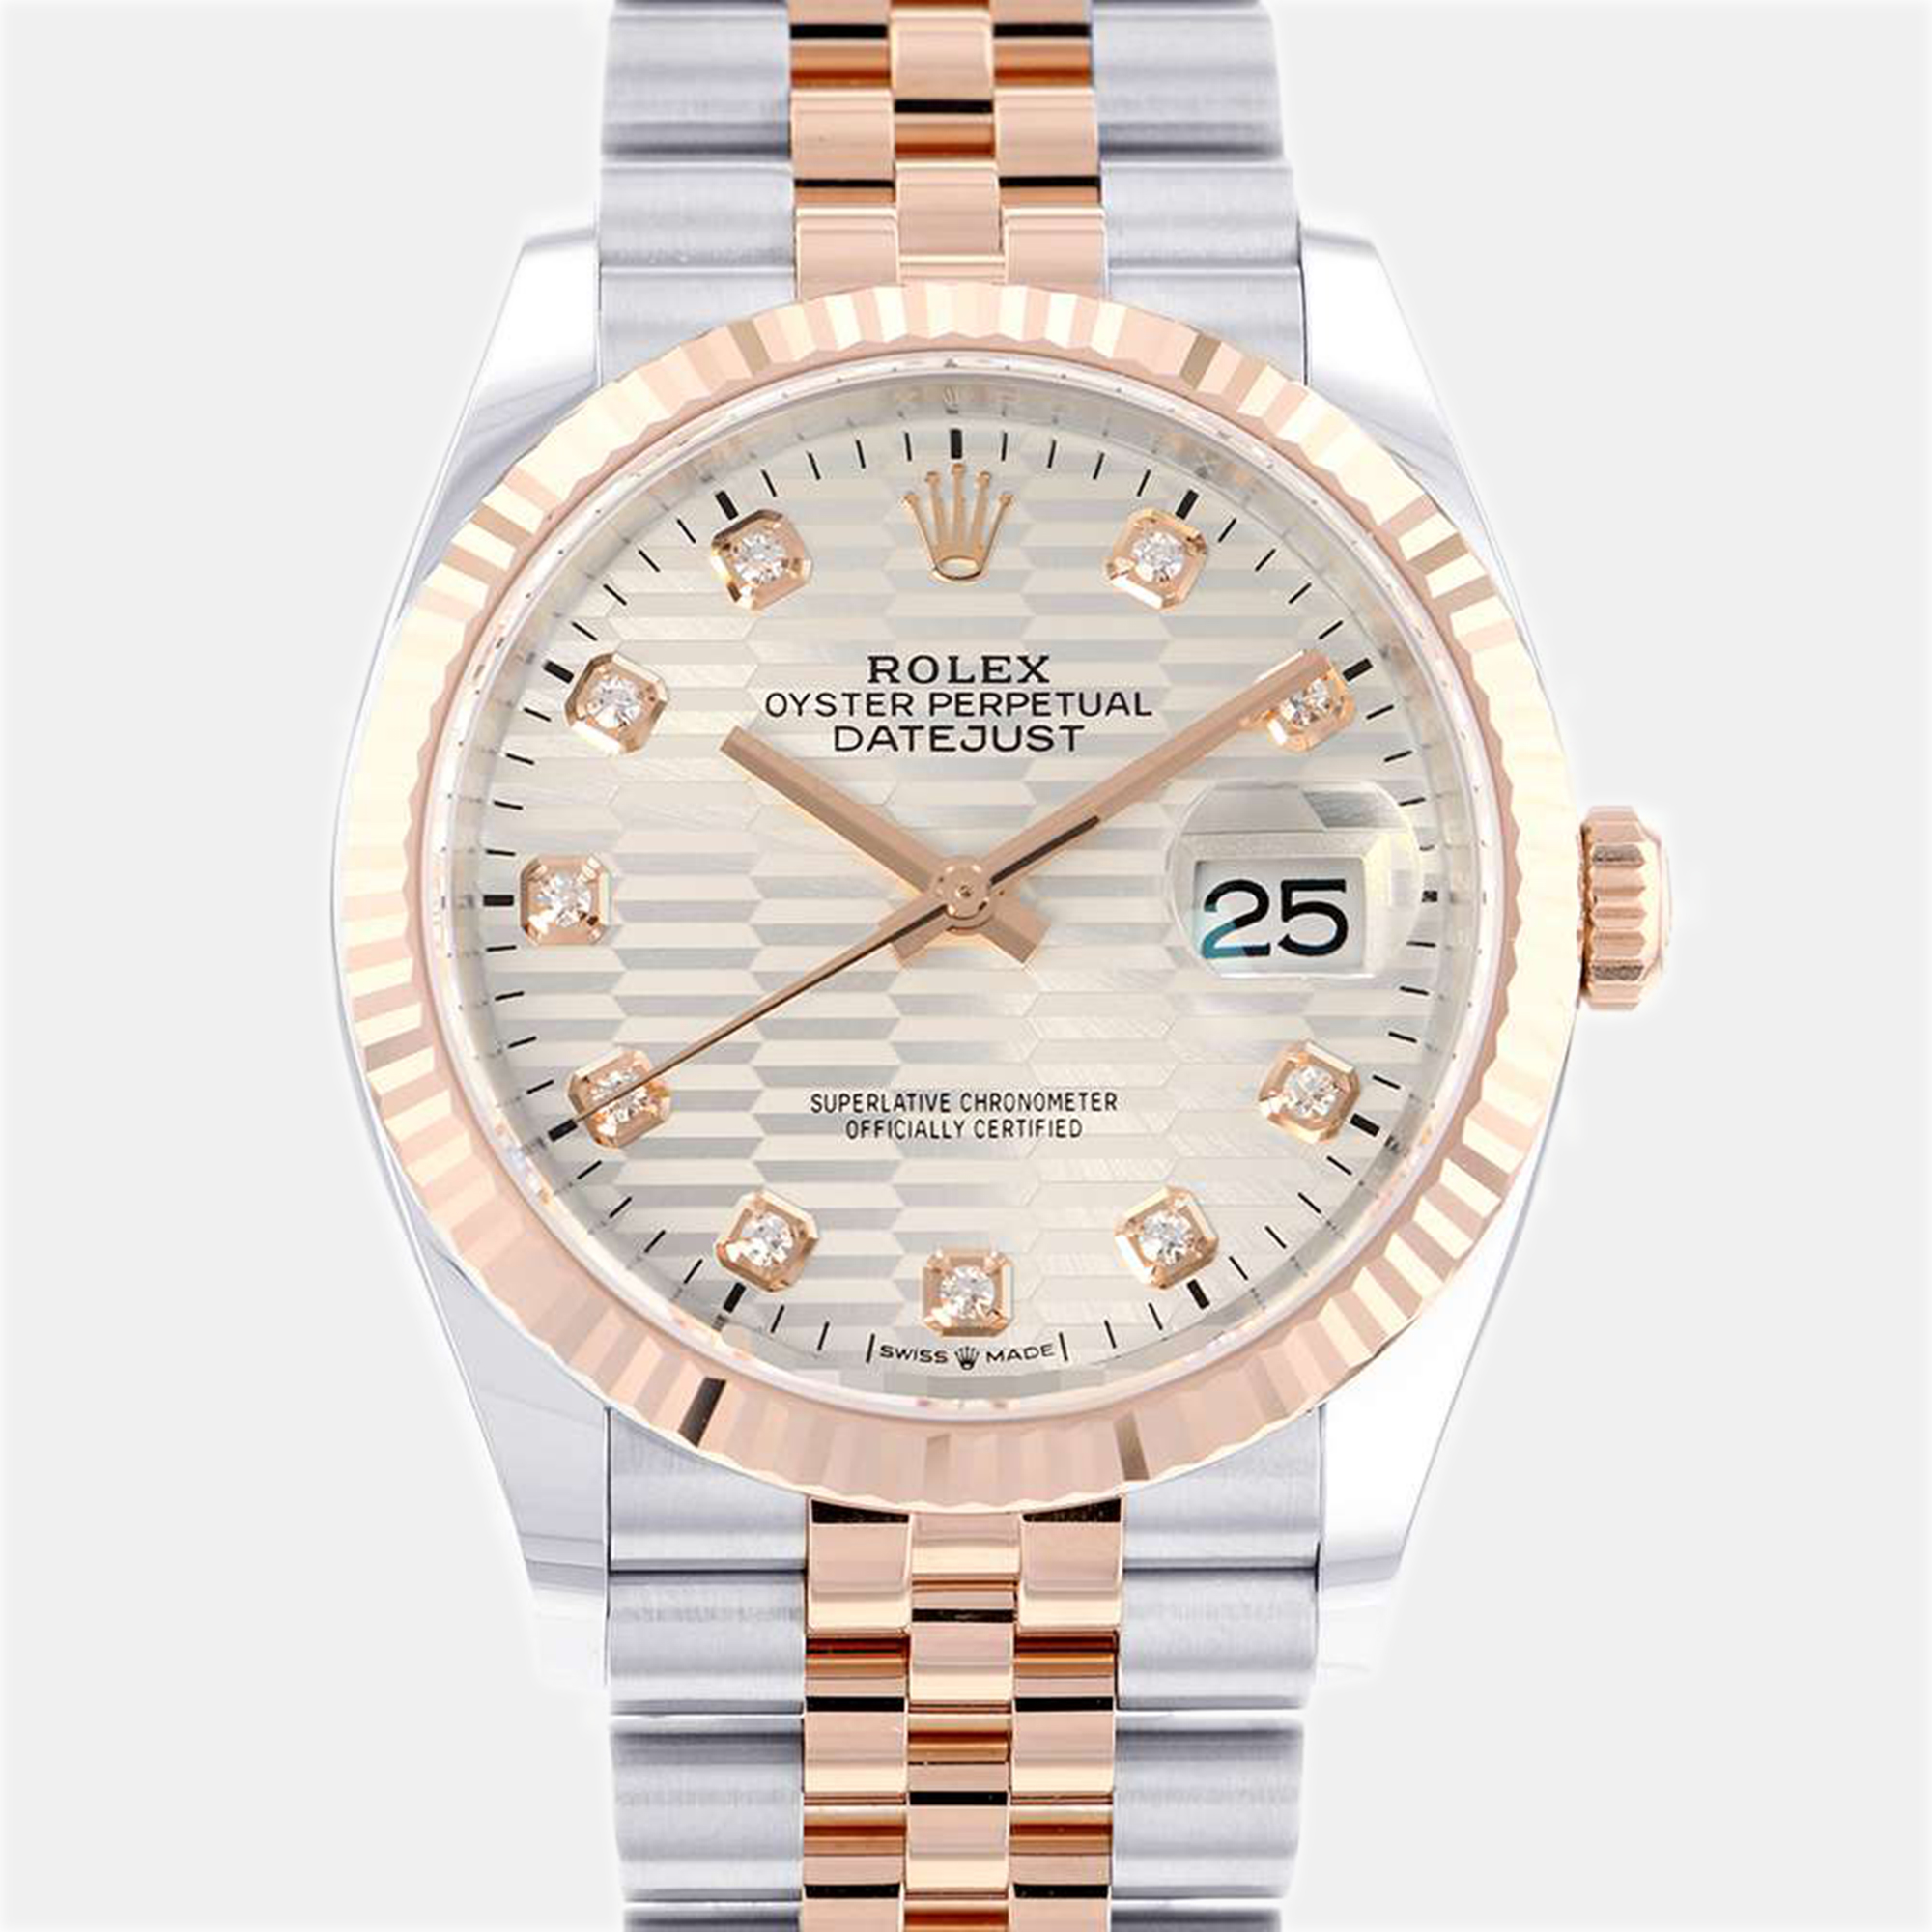 Rolex Silver Diamond 18k Rose Gold And Stainless Steel Datejust 126231 Automatic Men's Wristwatch 36 Mm